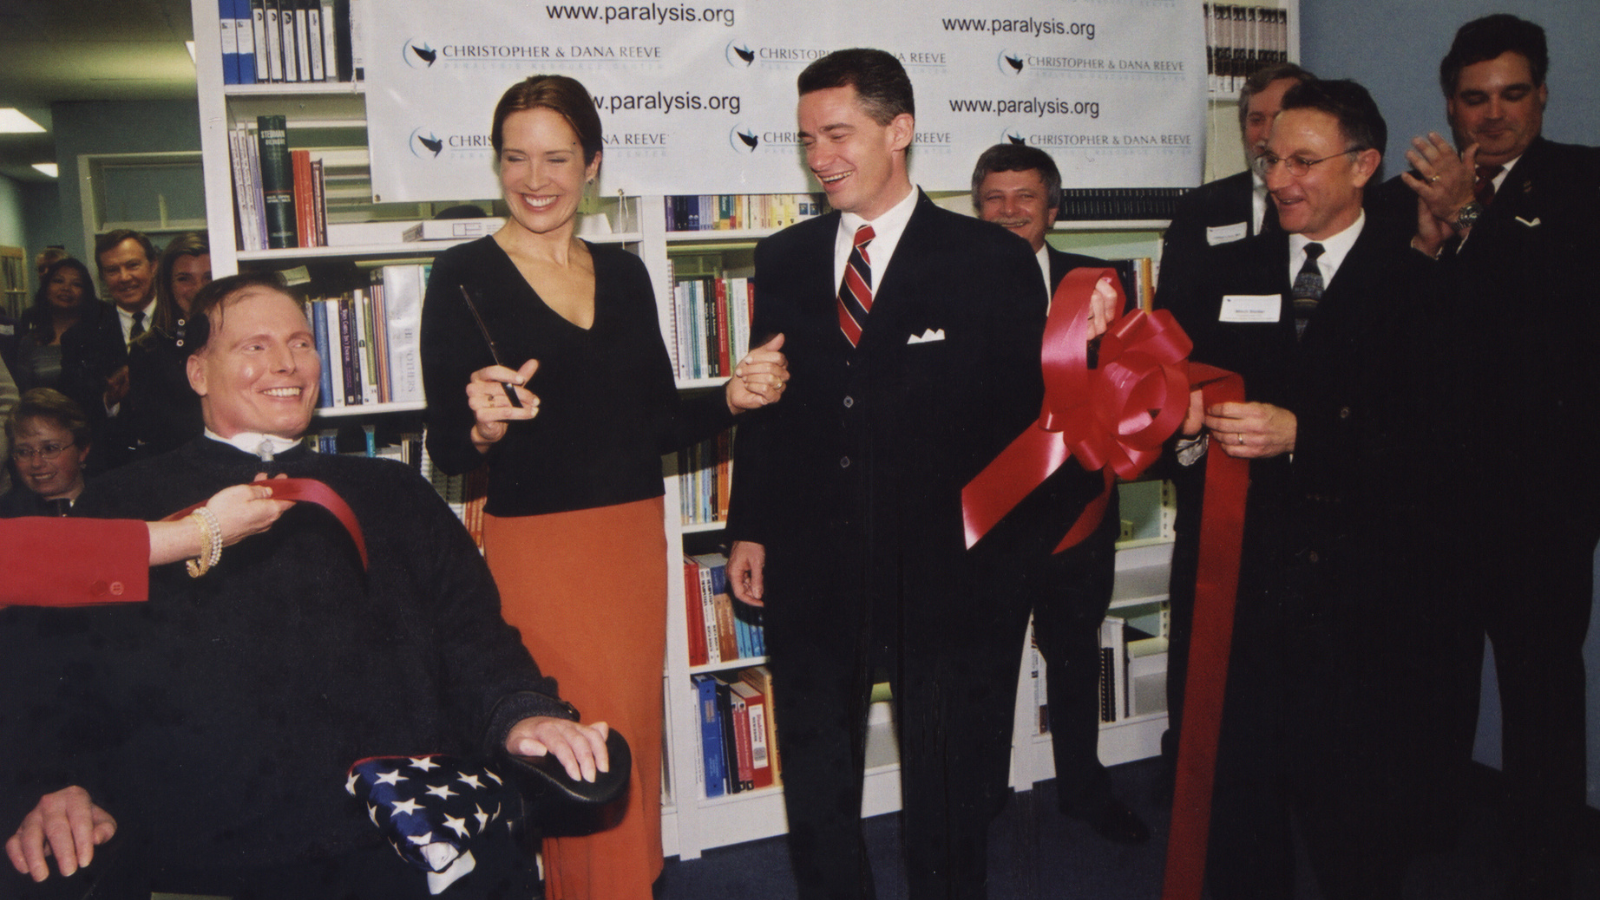 Photo of Christopher and Dana Reeve at the opening of the National Paralysis Resource Center.